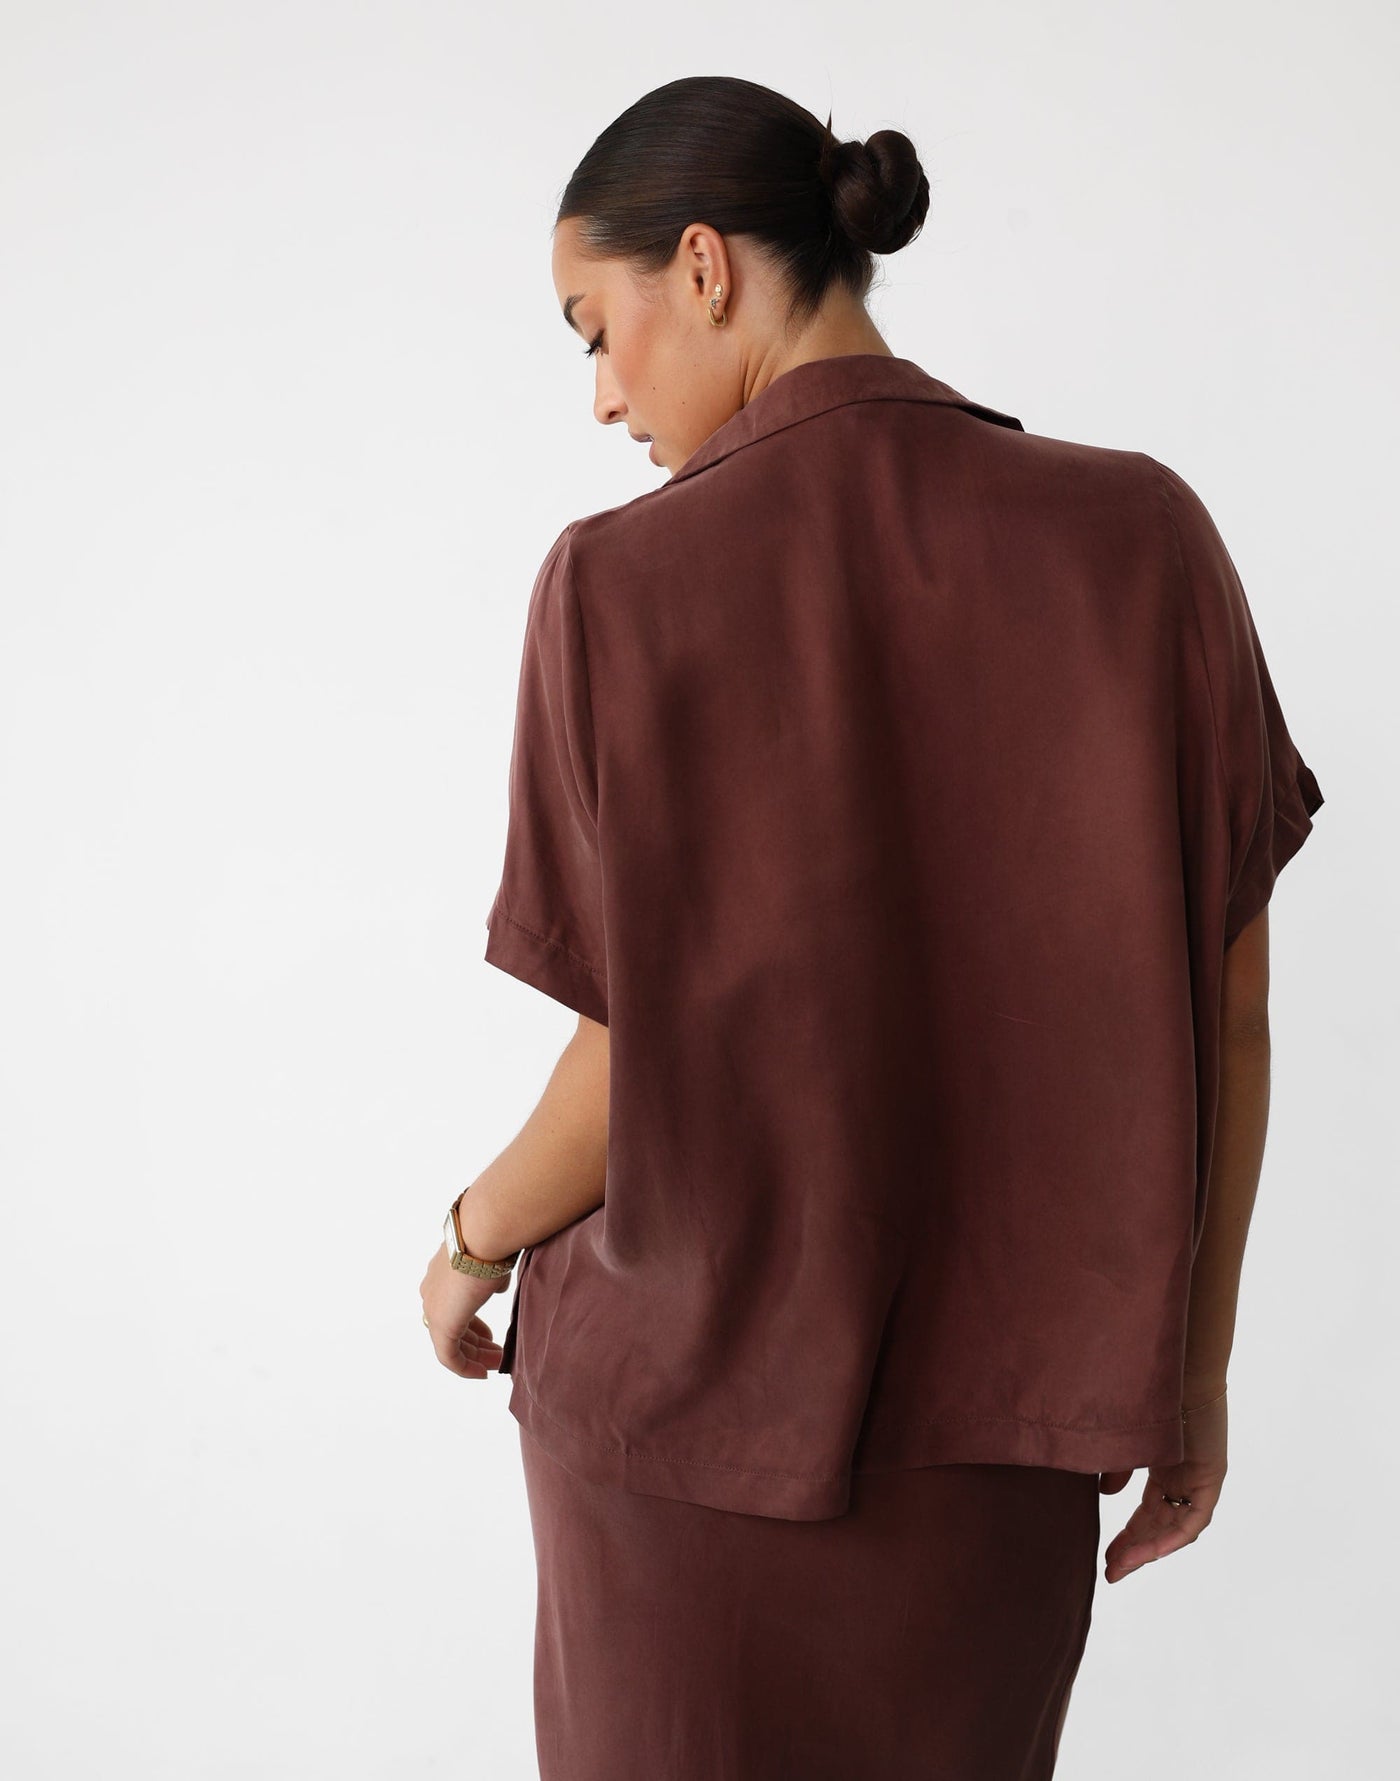 Amalie Shirt (Chestnut) - Cocoa Brown Short Sleeve Button Up Cupro Shirt - Women's Top - Charcoal Clothing